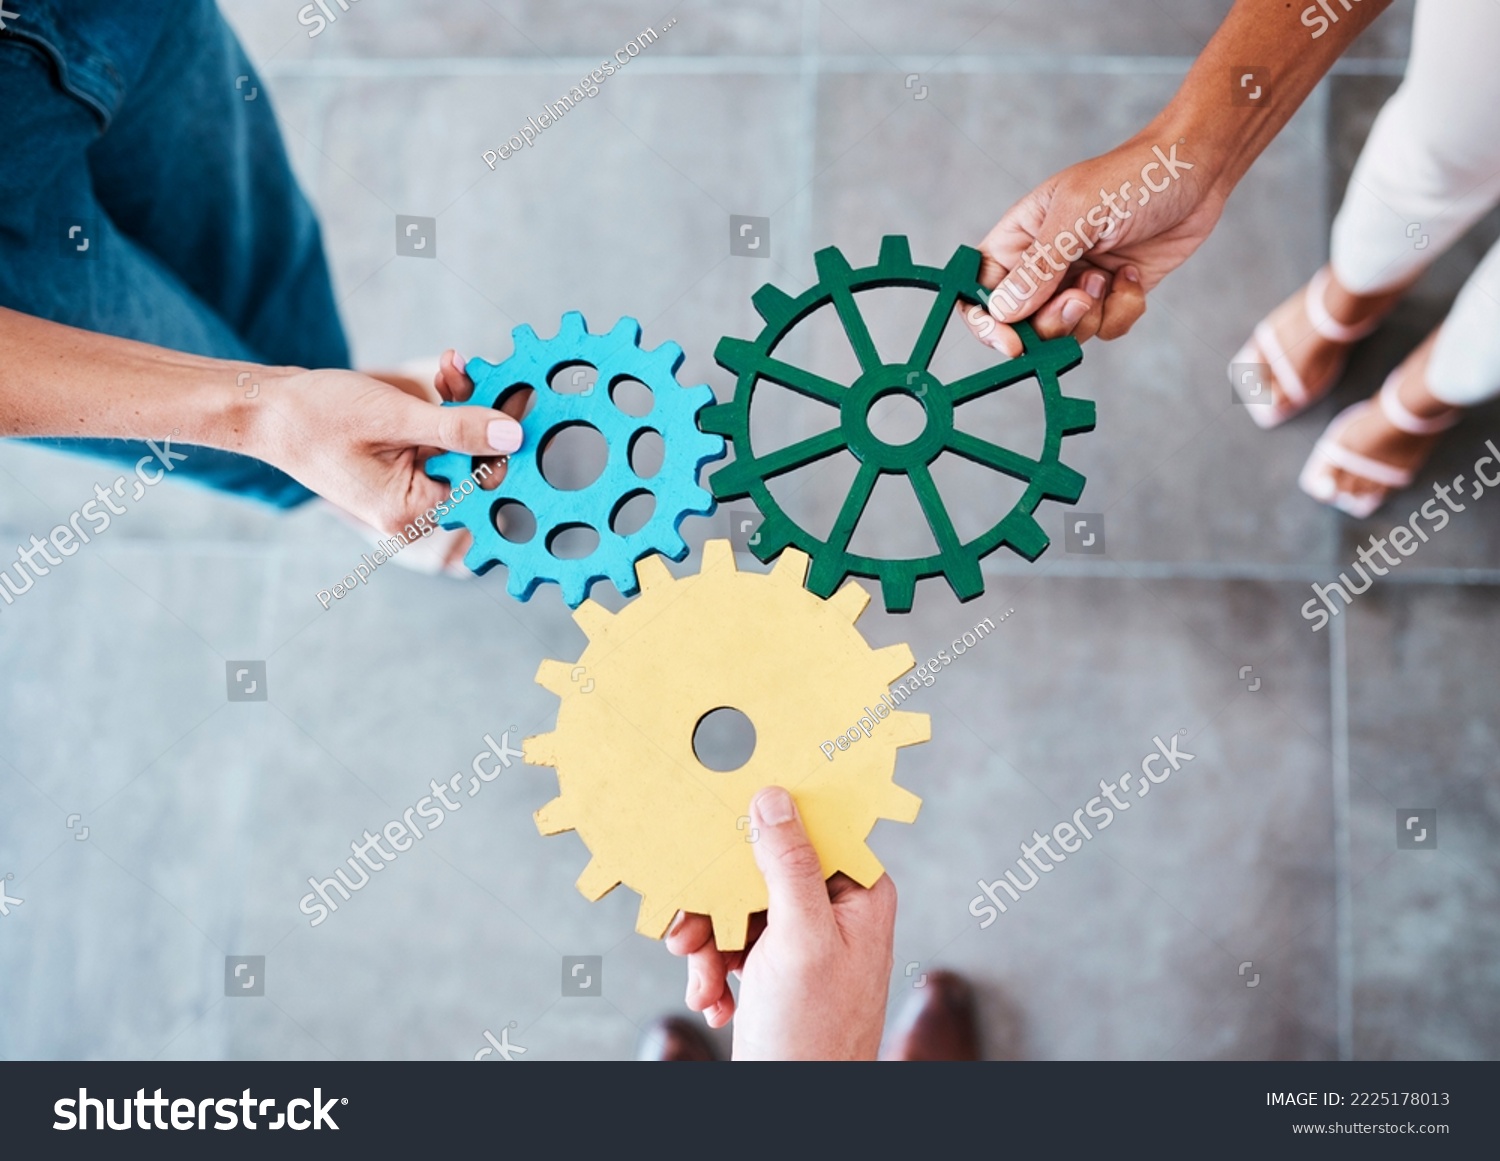 Settings, gear icon and teamwork with business people or team together for collaboration and synergy with cog wheel strategy. Office group hands for problem solving, innovation and development #2225178013